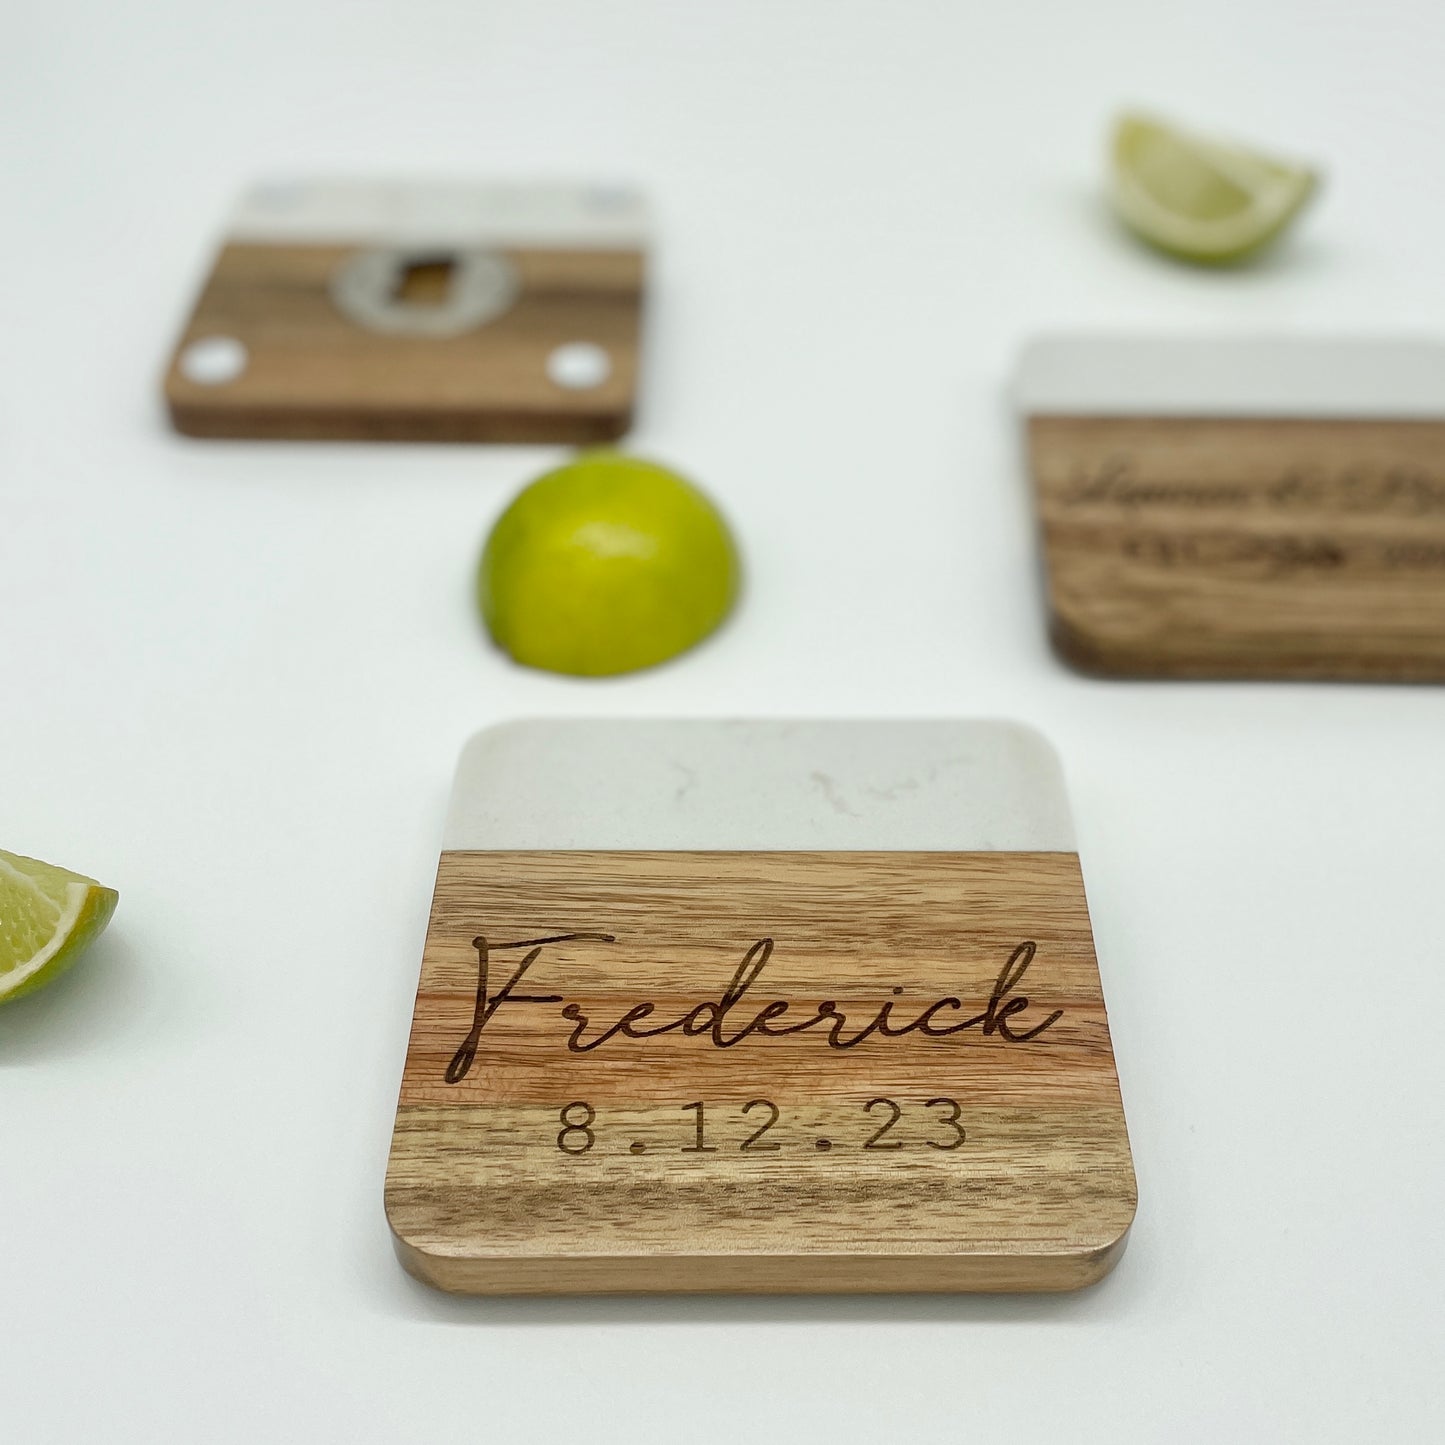 Marble & Wooden Square Bottle Opener Coasters (SET OF 4)